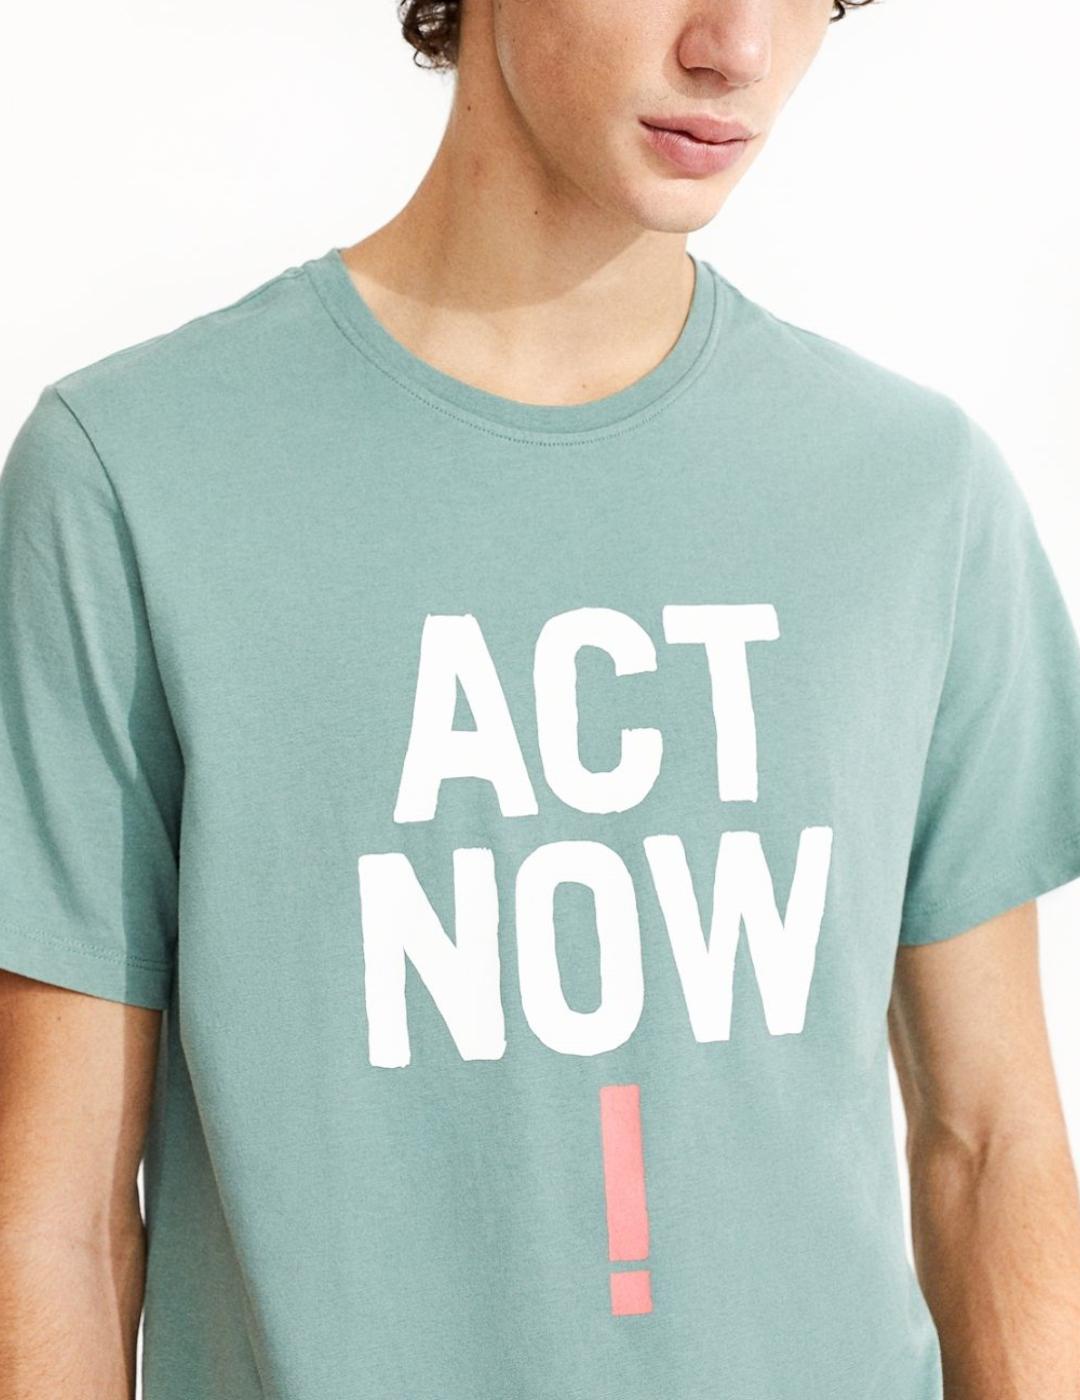 BAUME ACT NOW T-SHIRT MAN- Y